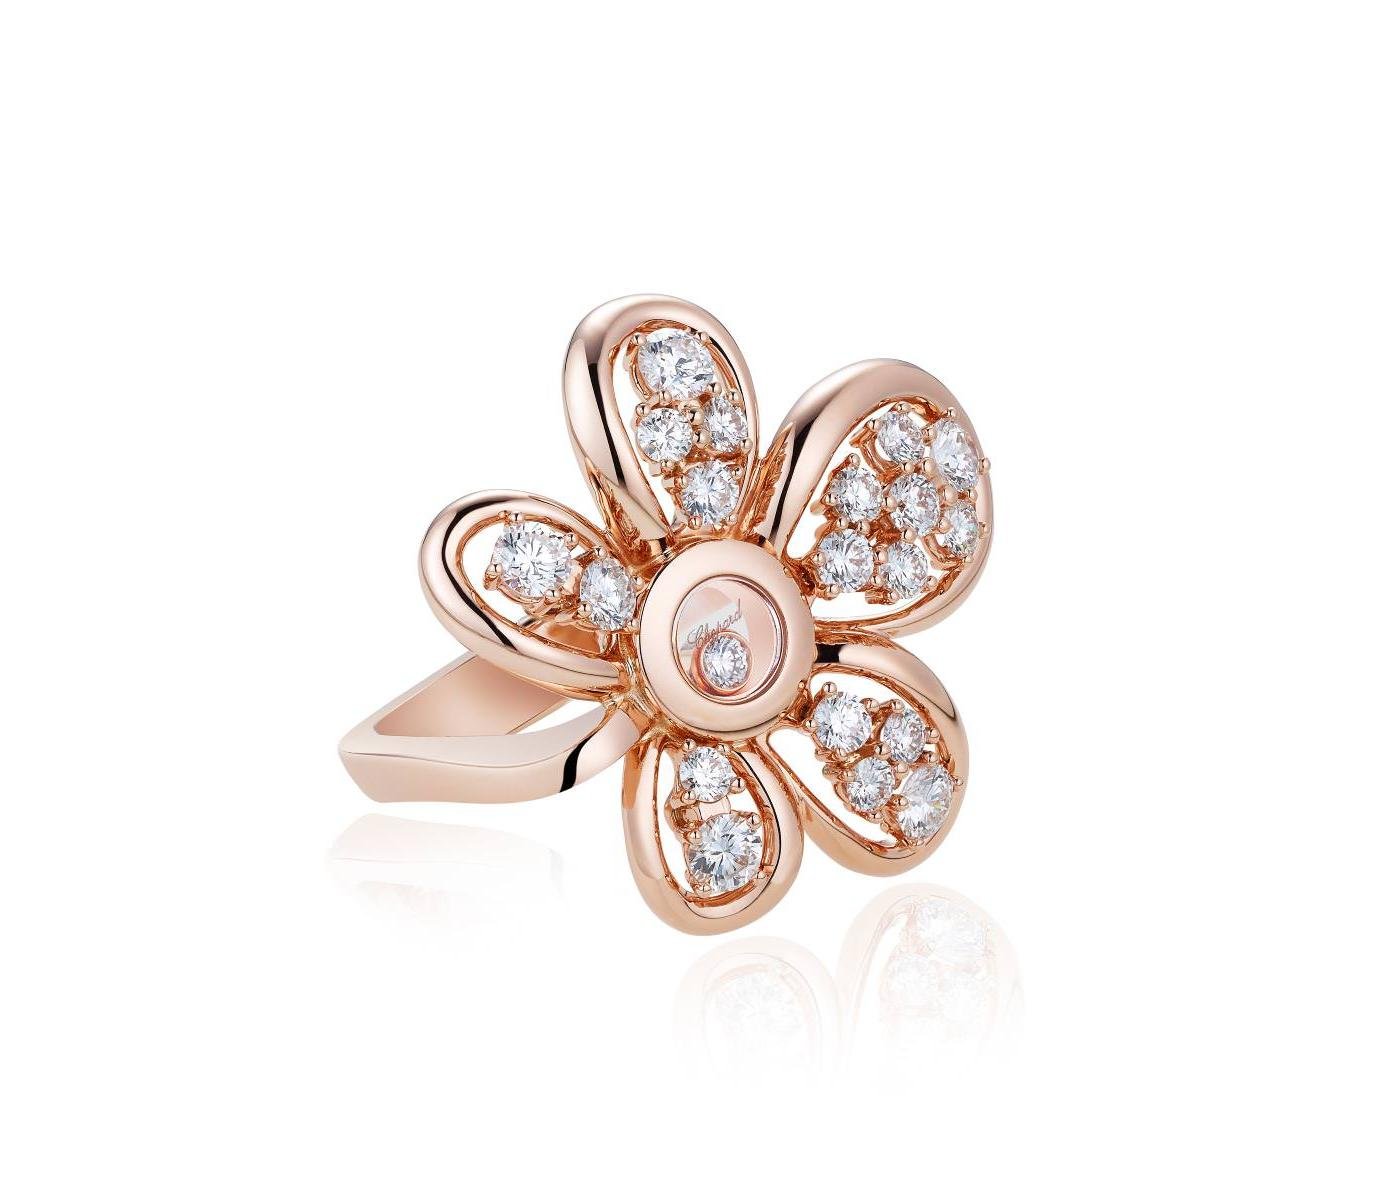 Ring by Chopard